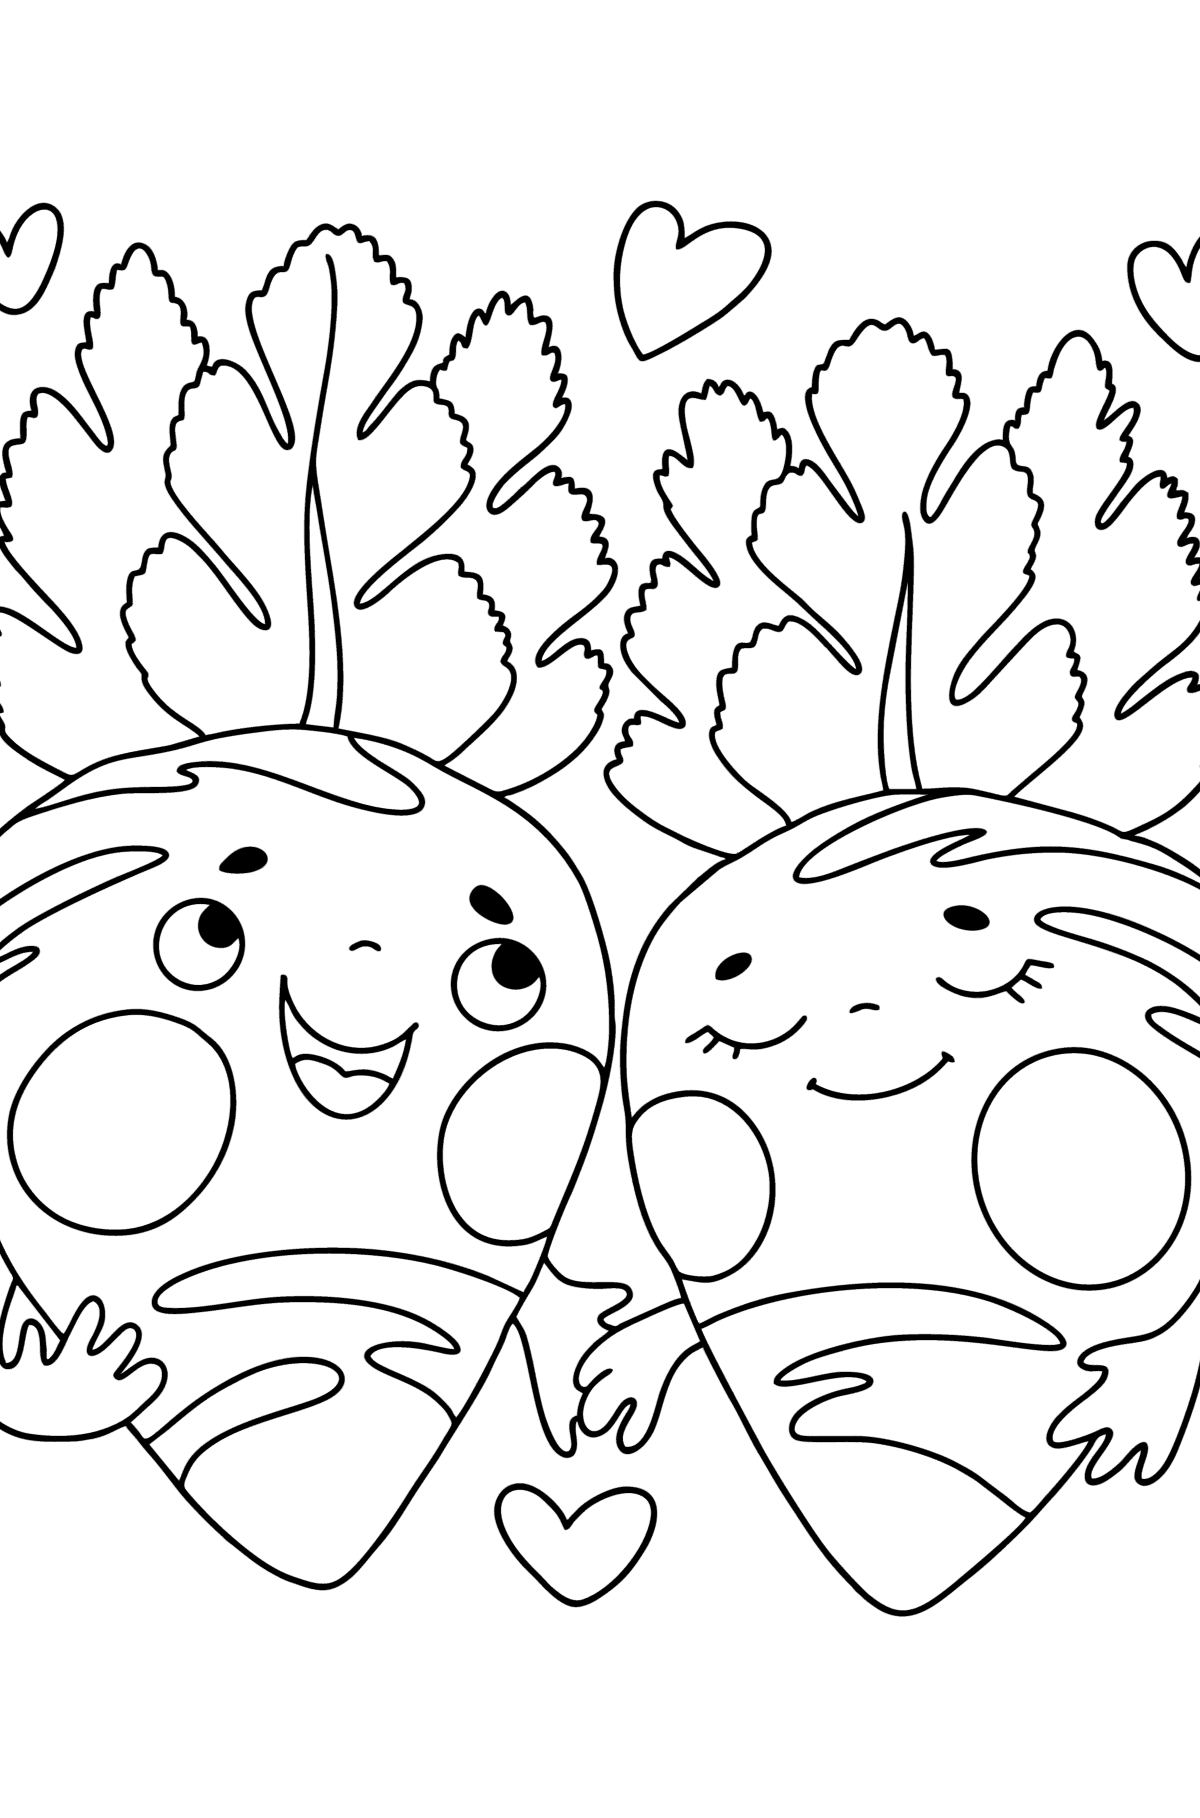 Carrots in love сolouring page - Coloring Pages for Kids